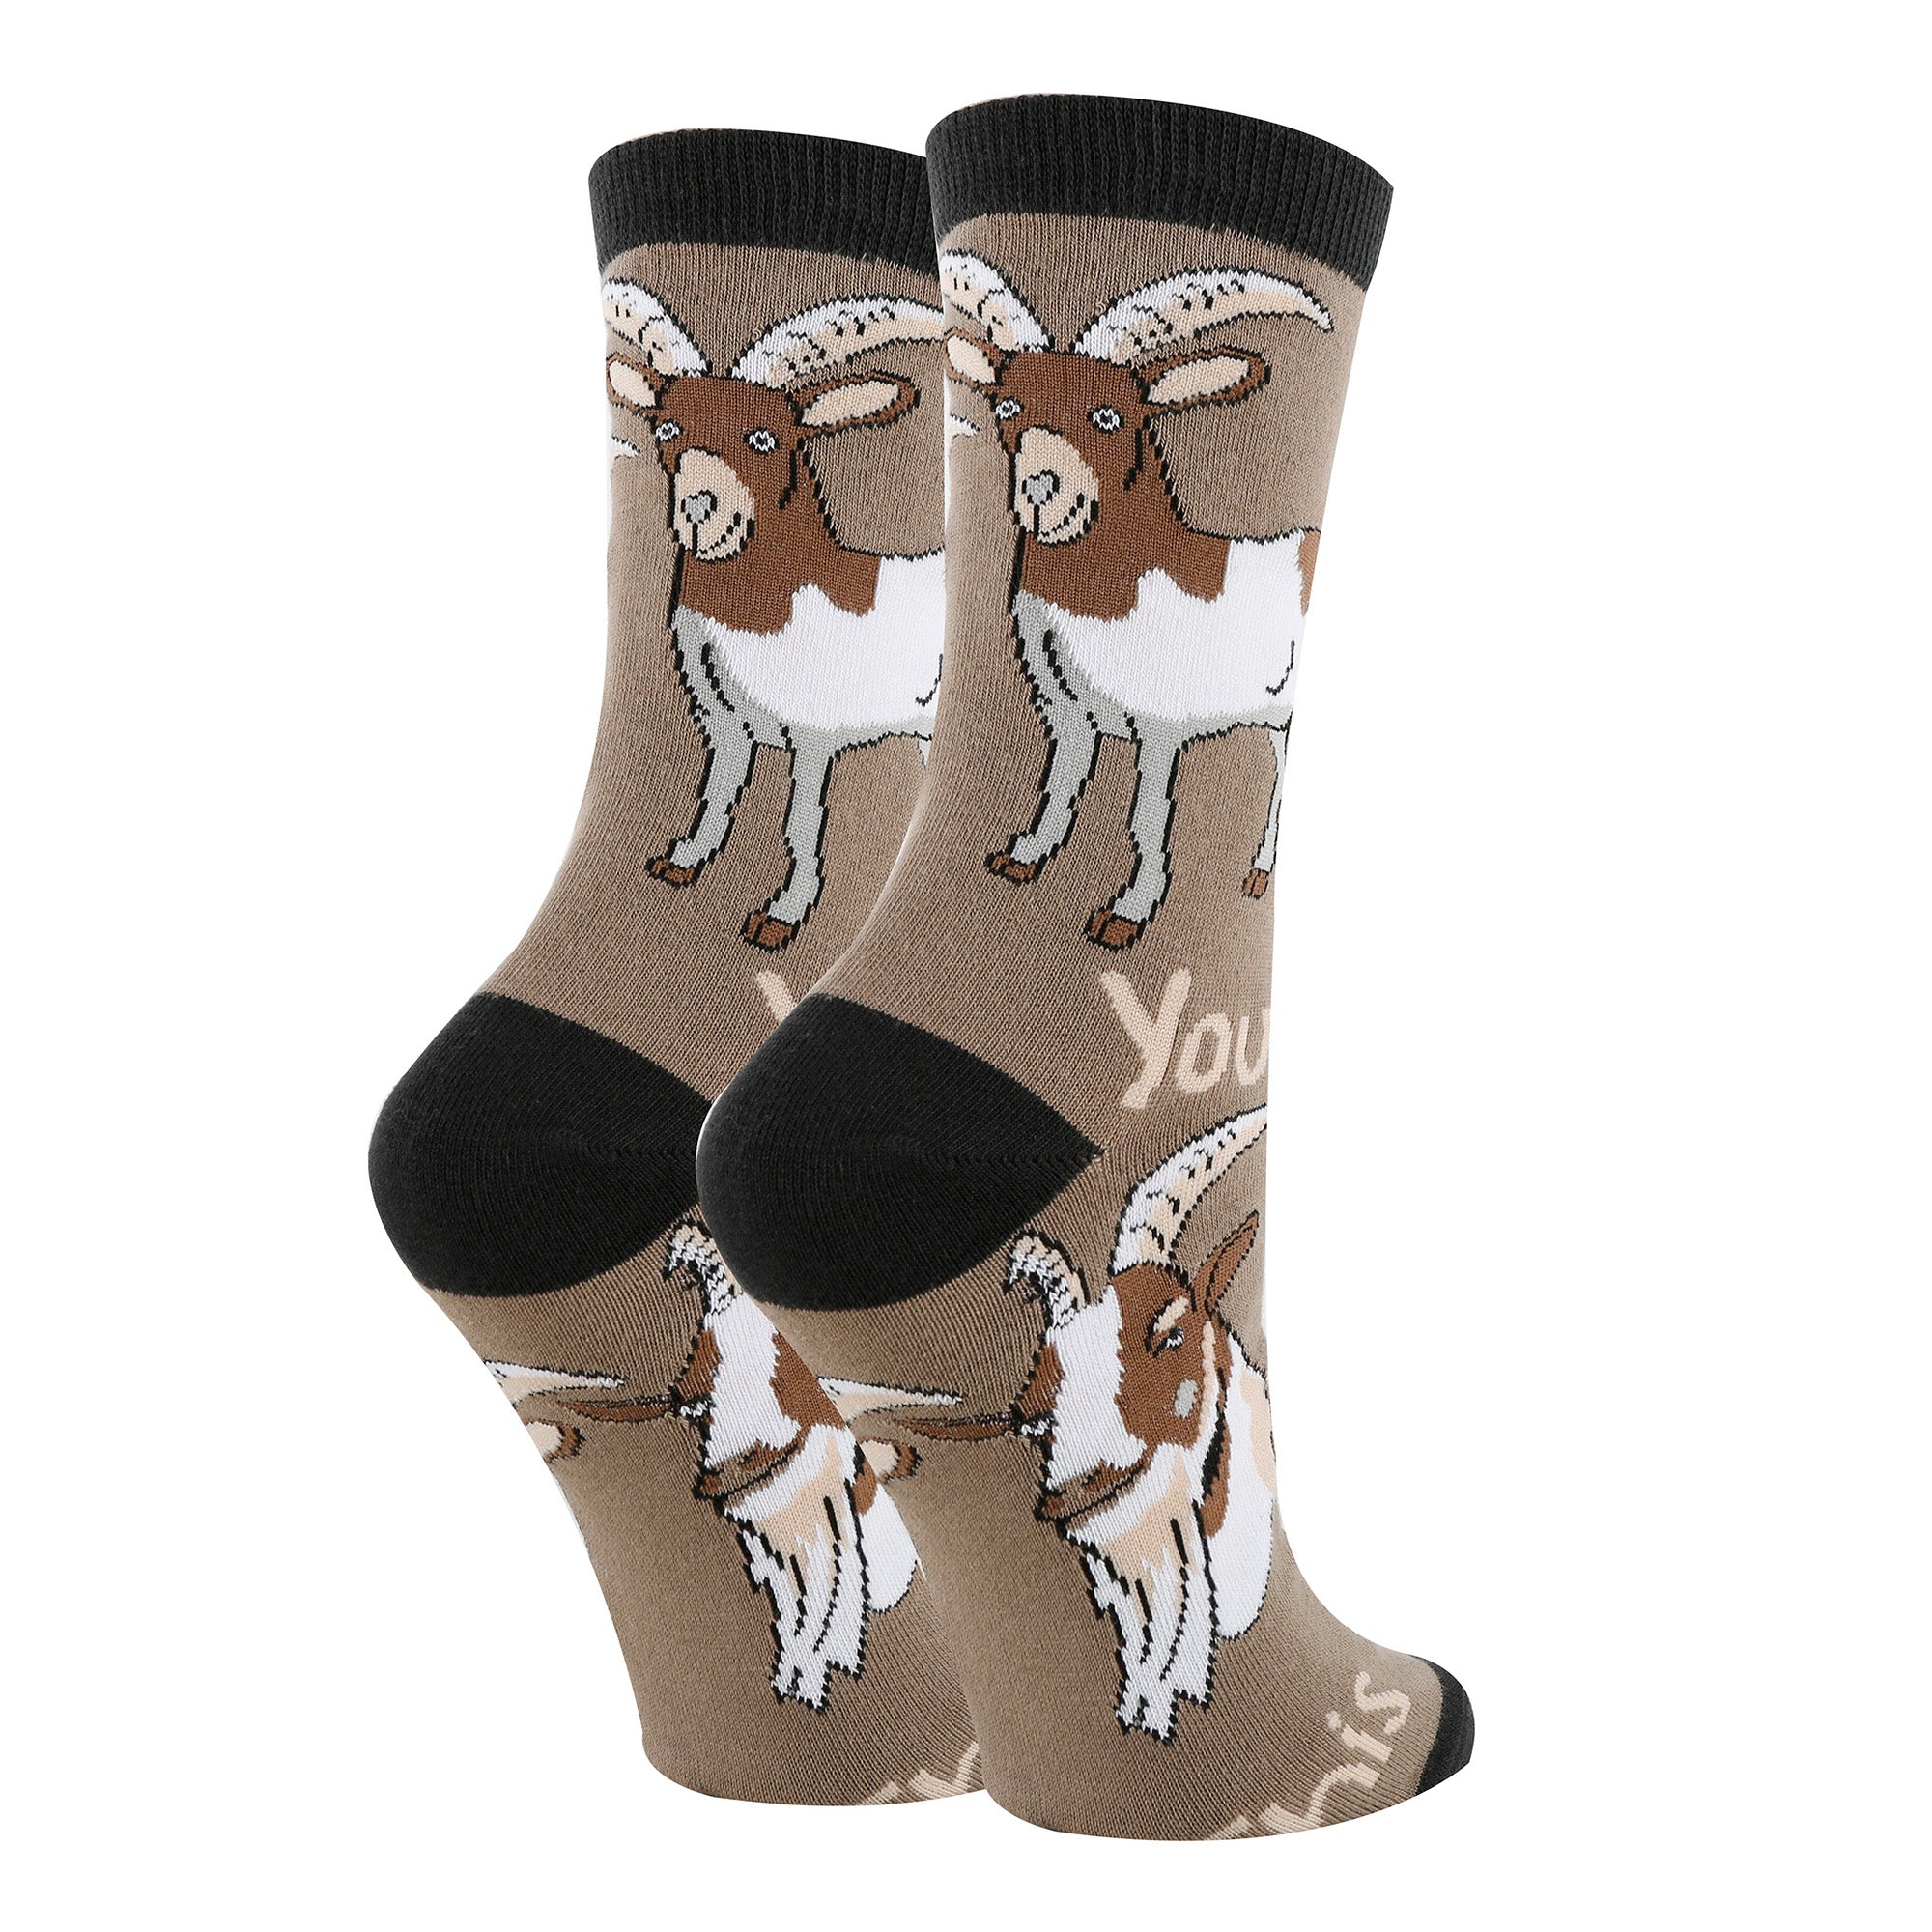 You Goat This Socks-2